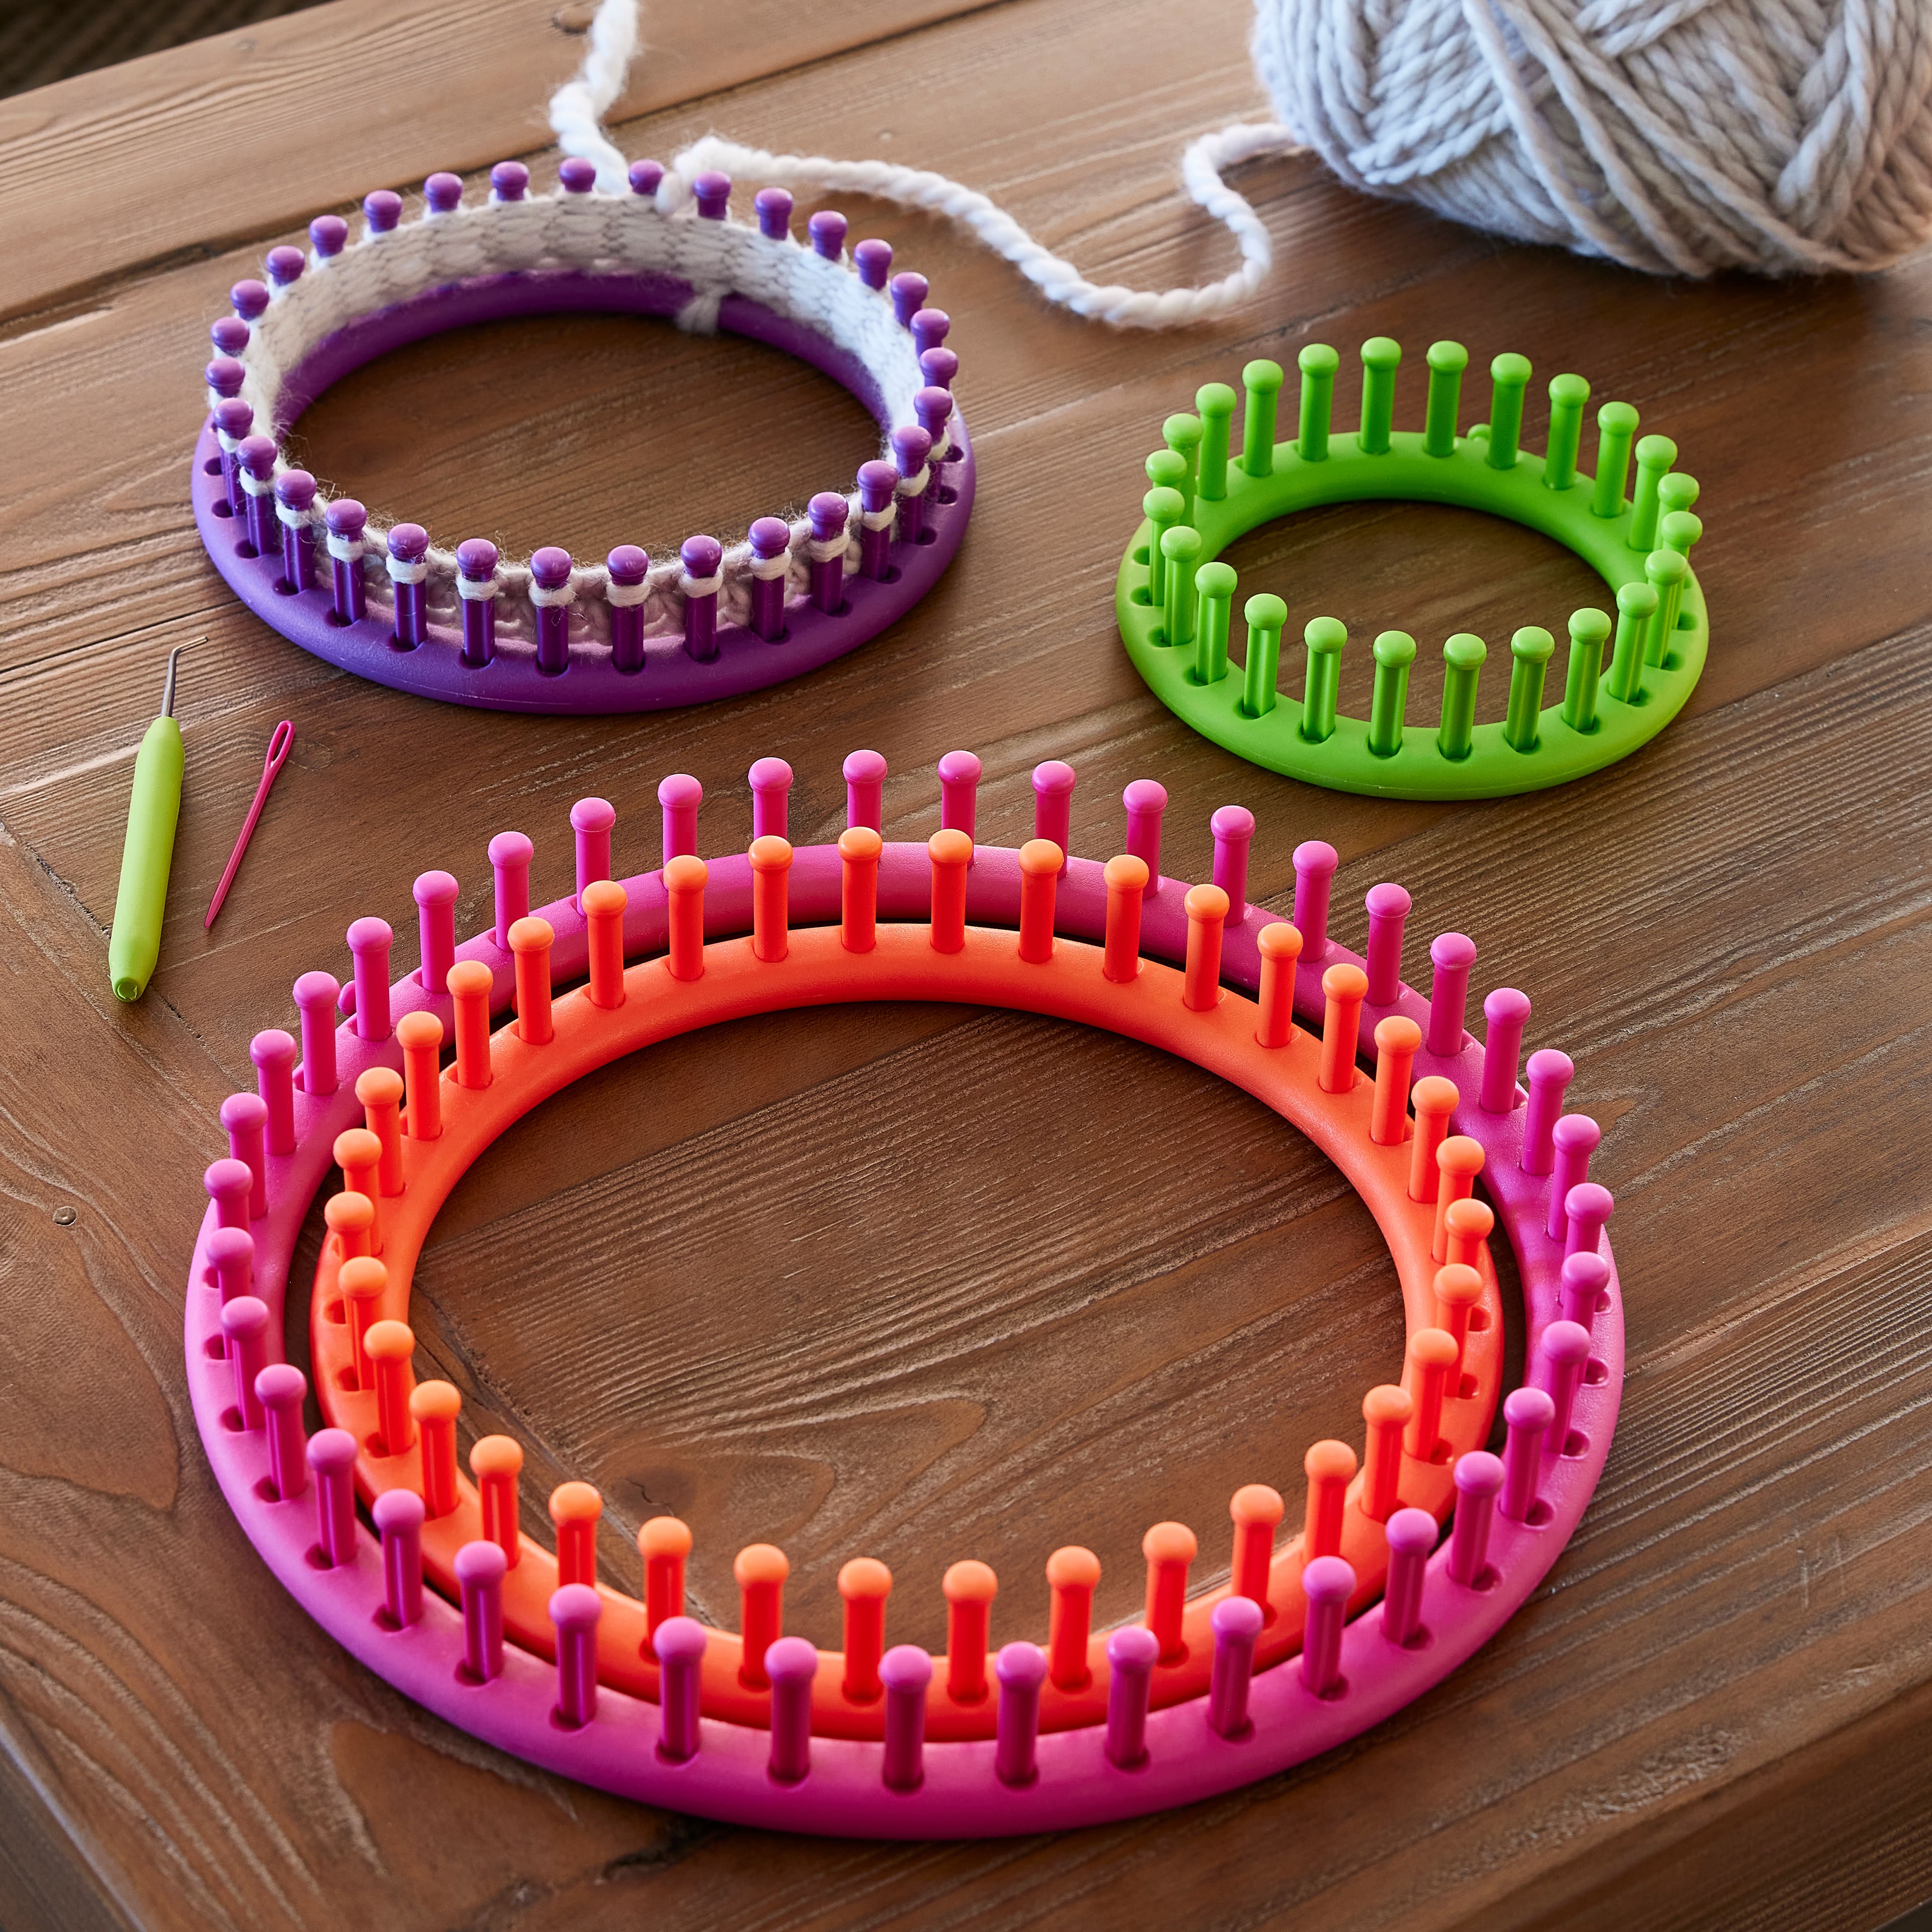 Loops & Threads® Knit Quick™ Knitting Loom Set | Michaels